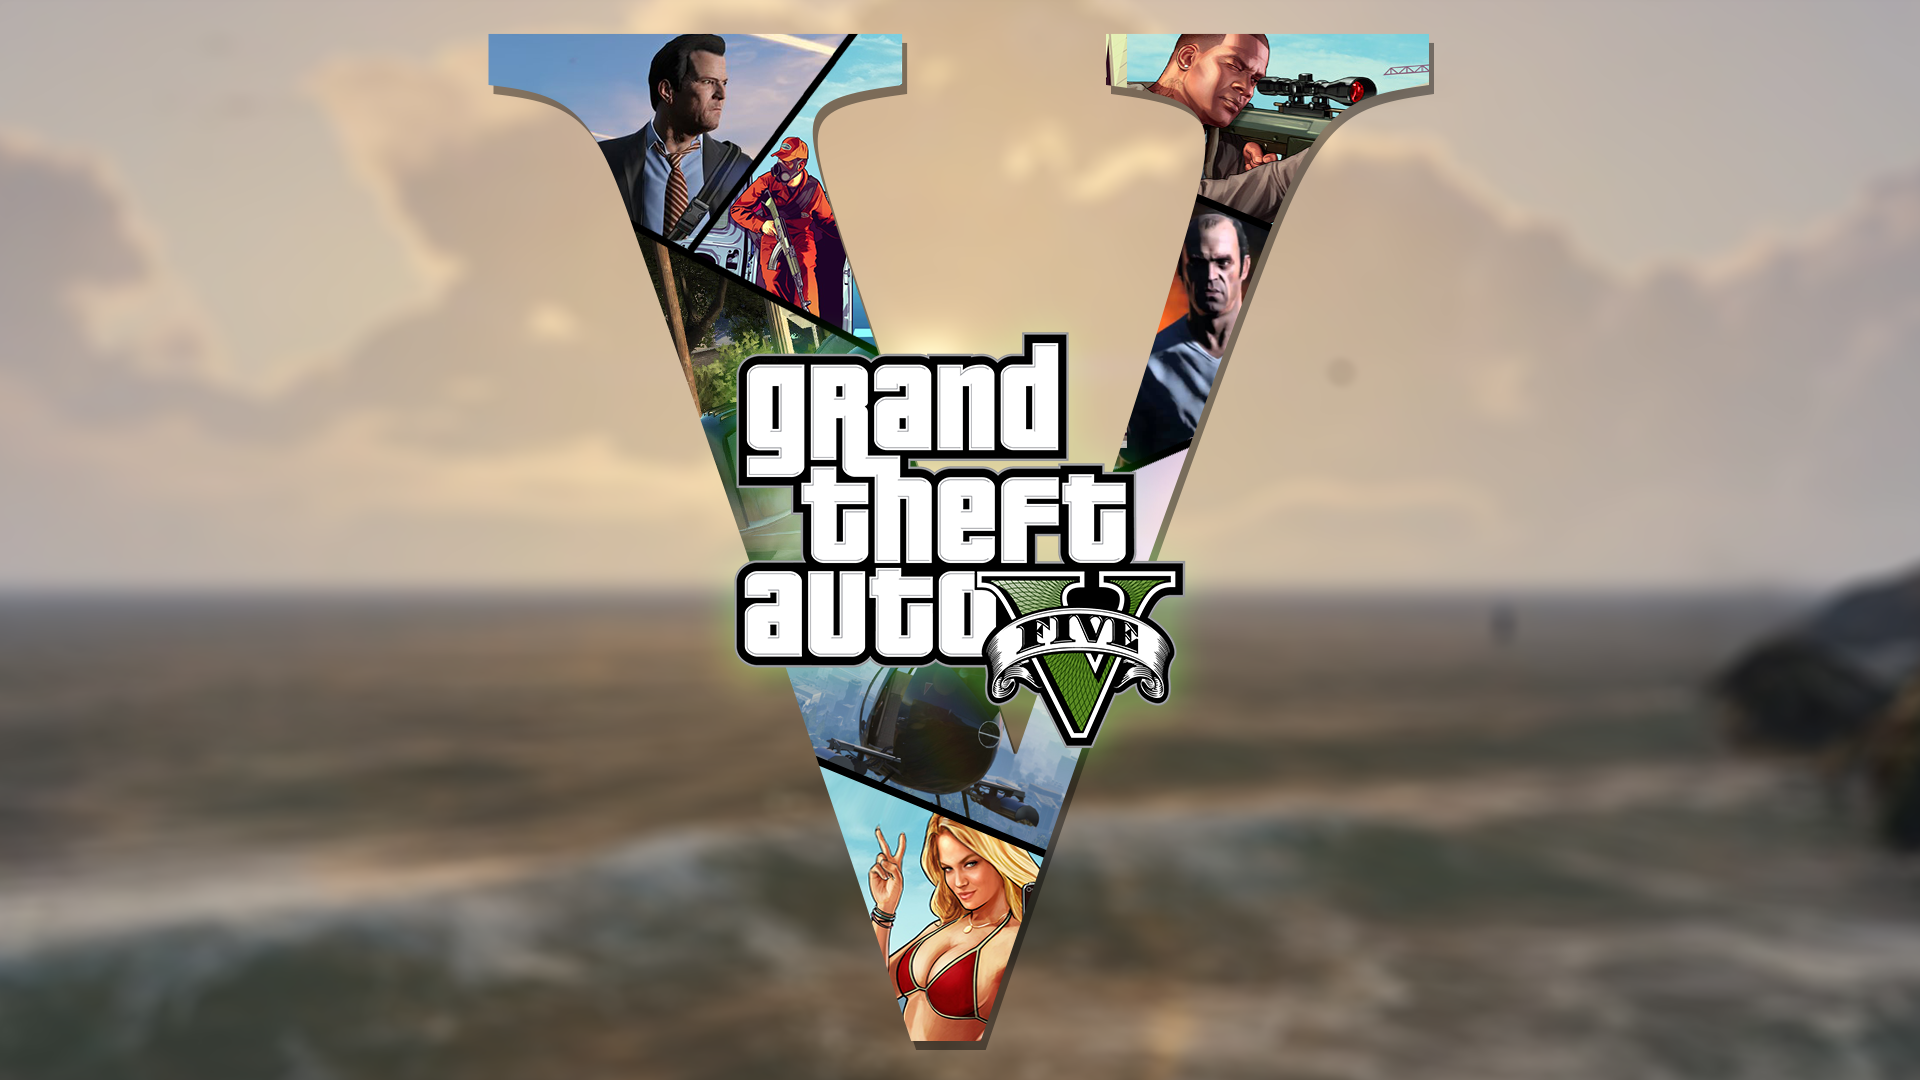 I made a gta 5 wallpaper. Just wanted to share with you guys ...